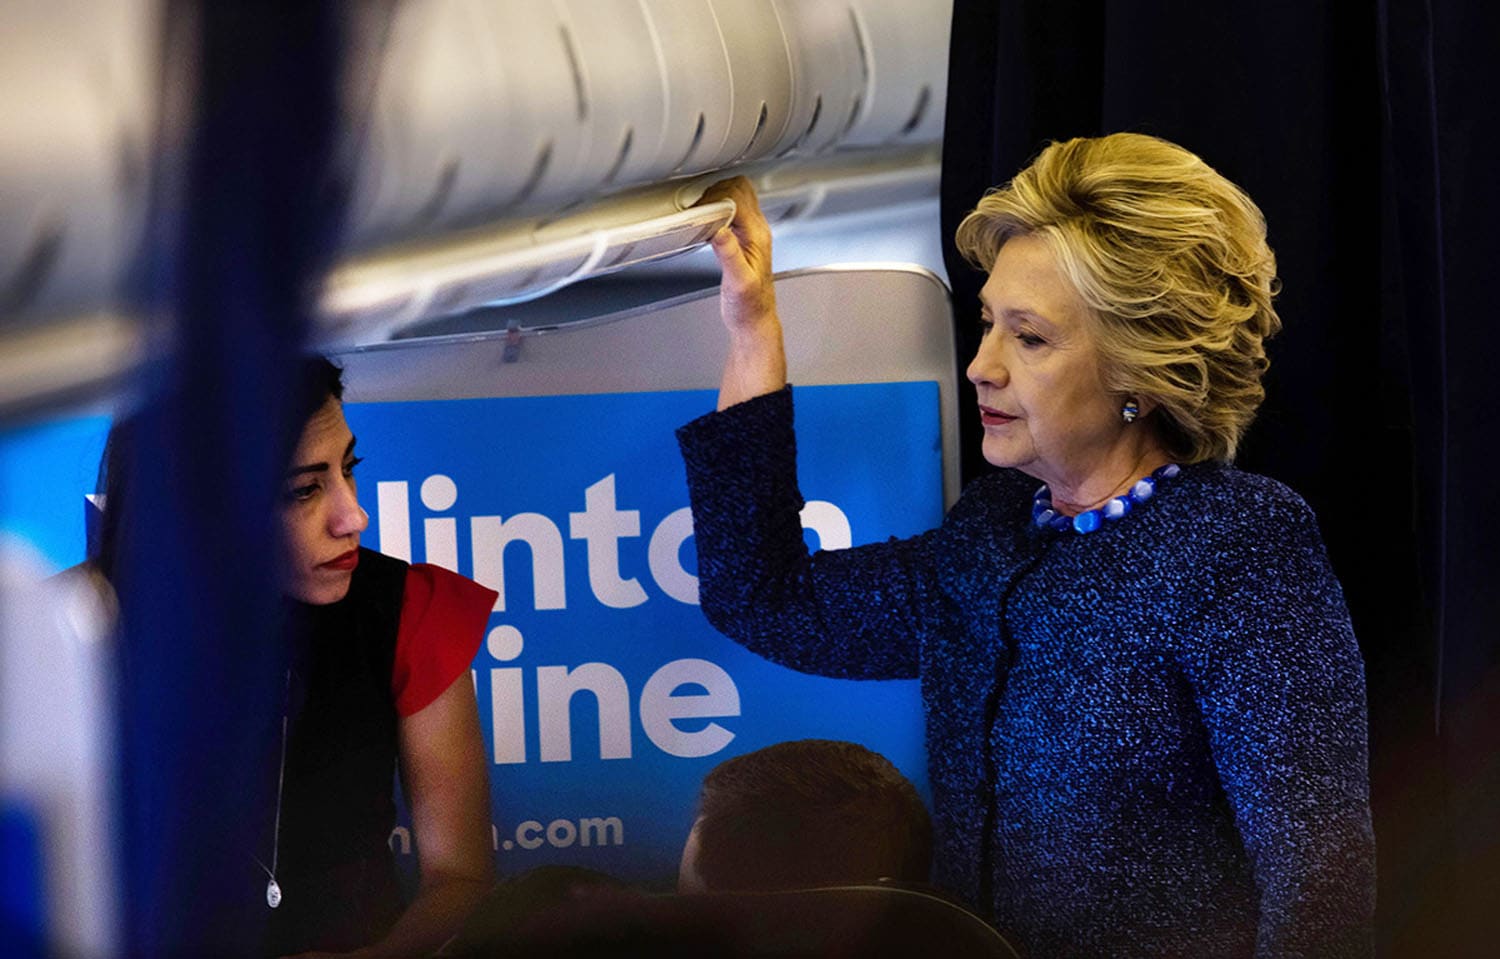 Hillary Clinton and Huma Abedin on the campaign plane in Iowa, Oct. 28, 2016